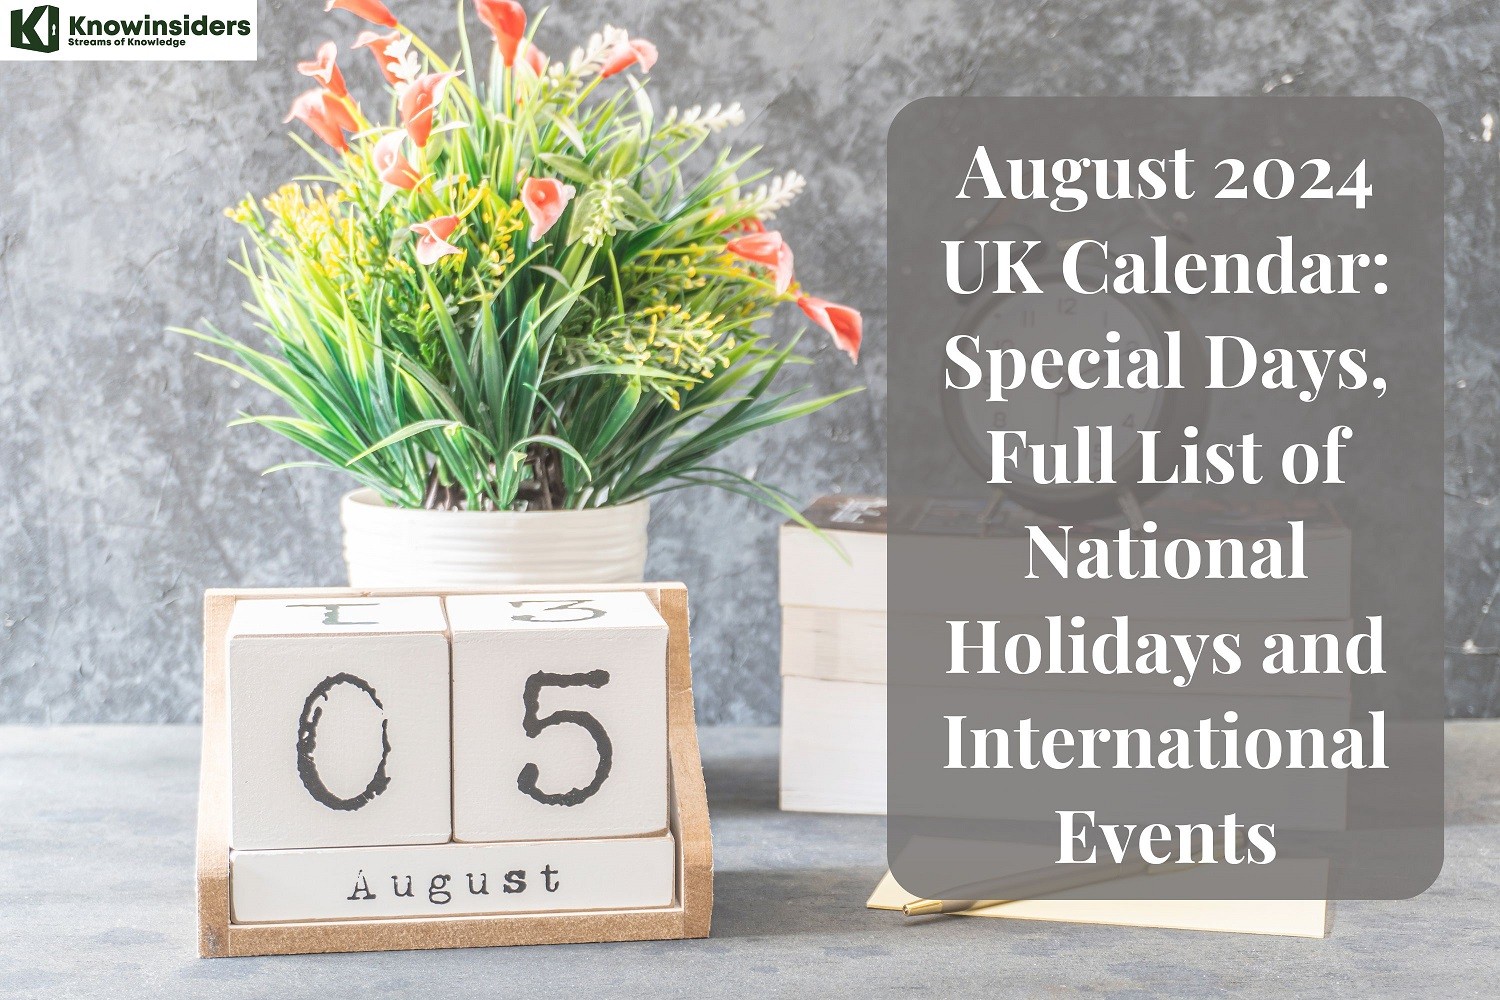 August 2024 UK Calendar: Special Days, Full List of National Holidays and International Events